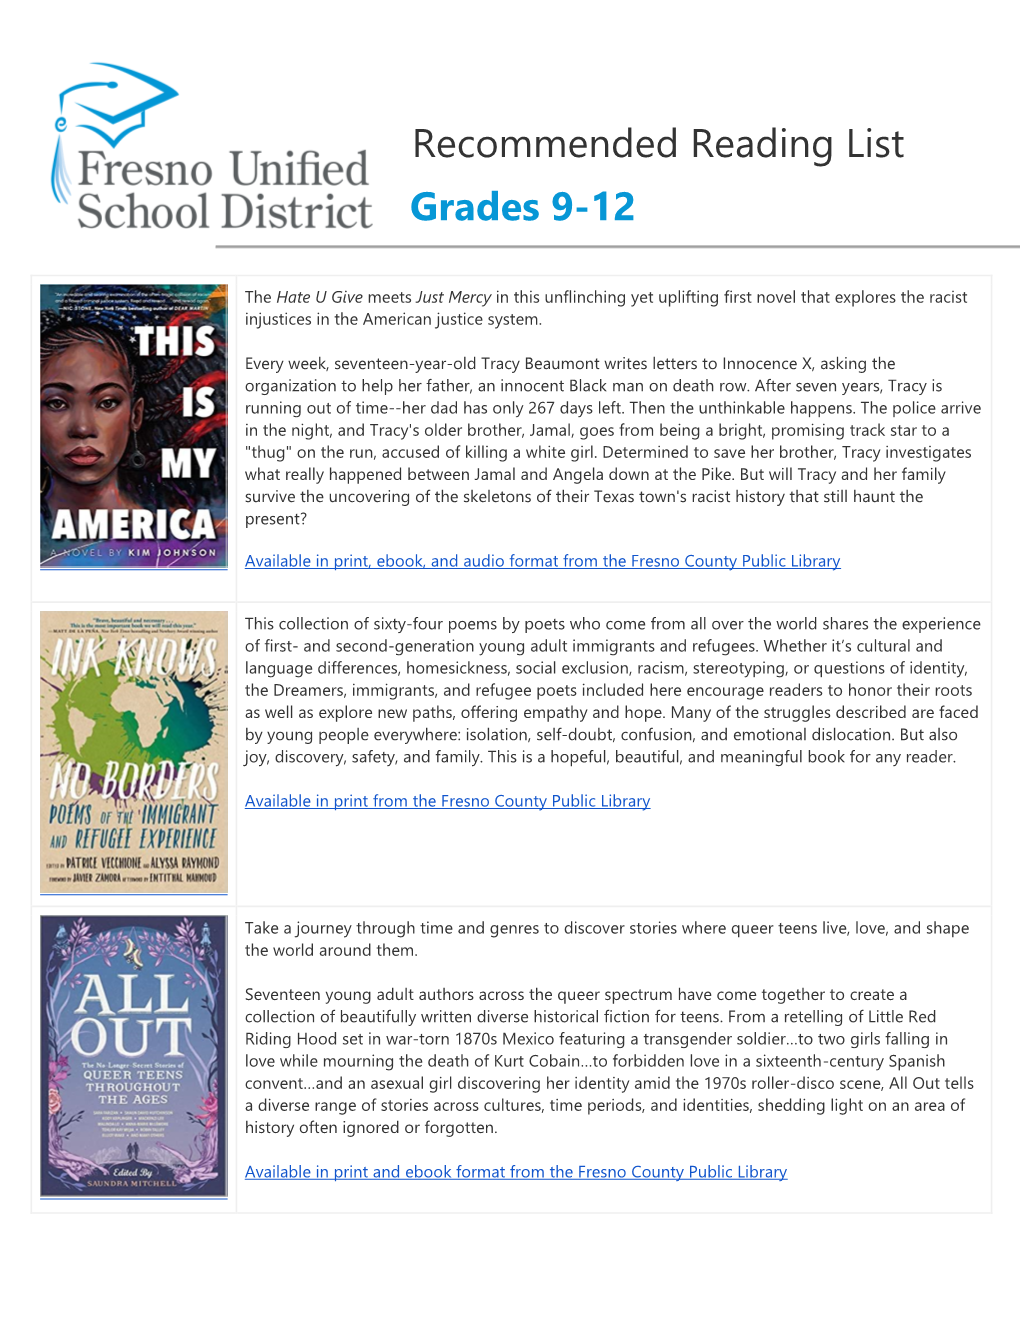 Recommended Reading List Grades 9-12